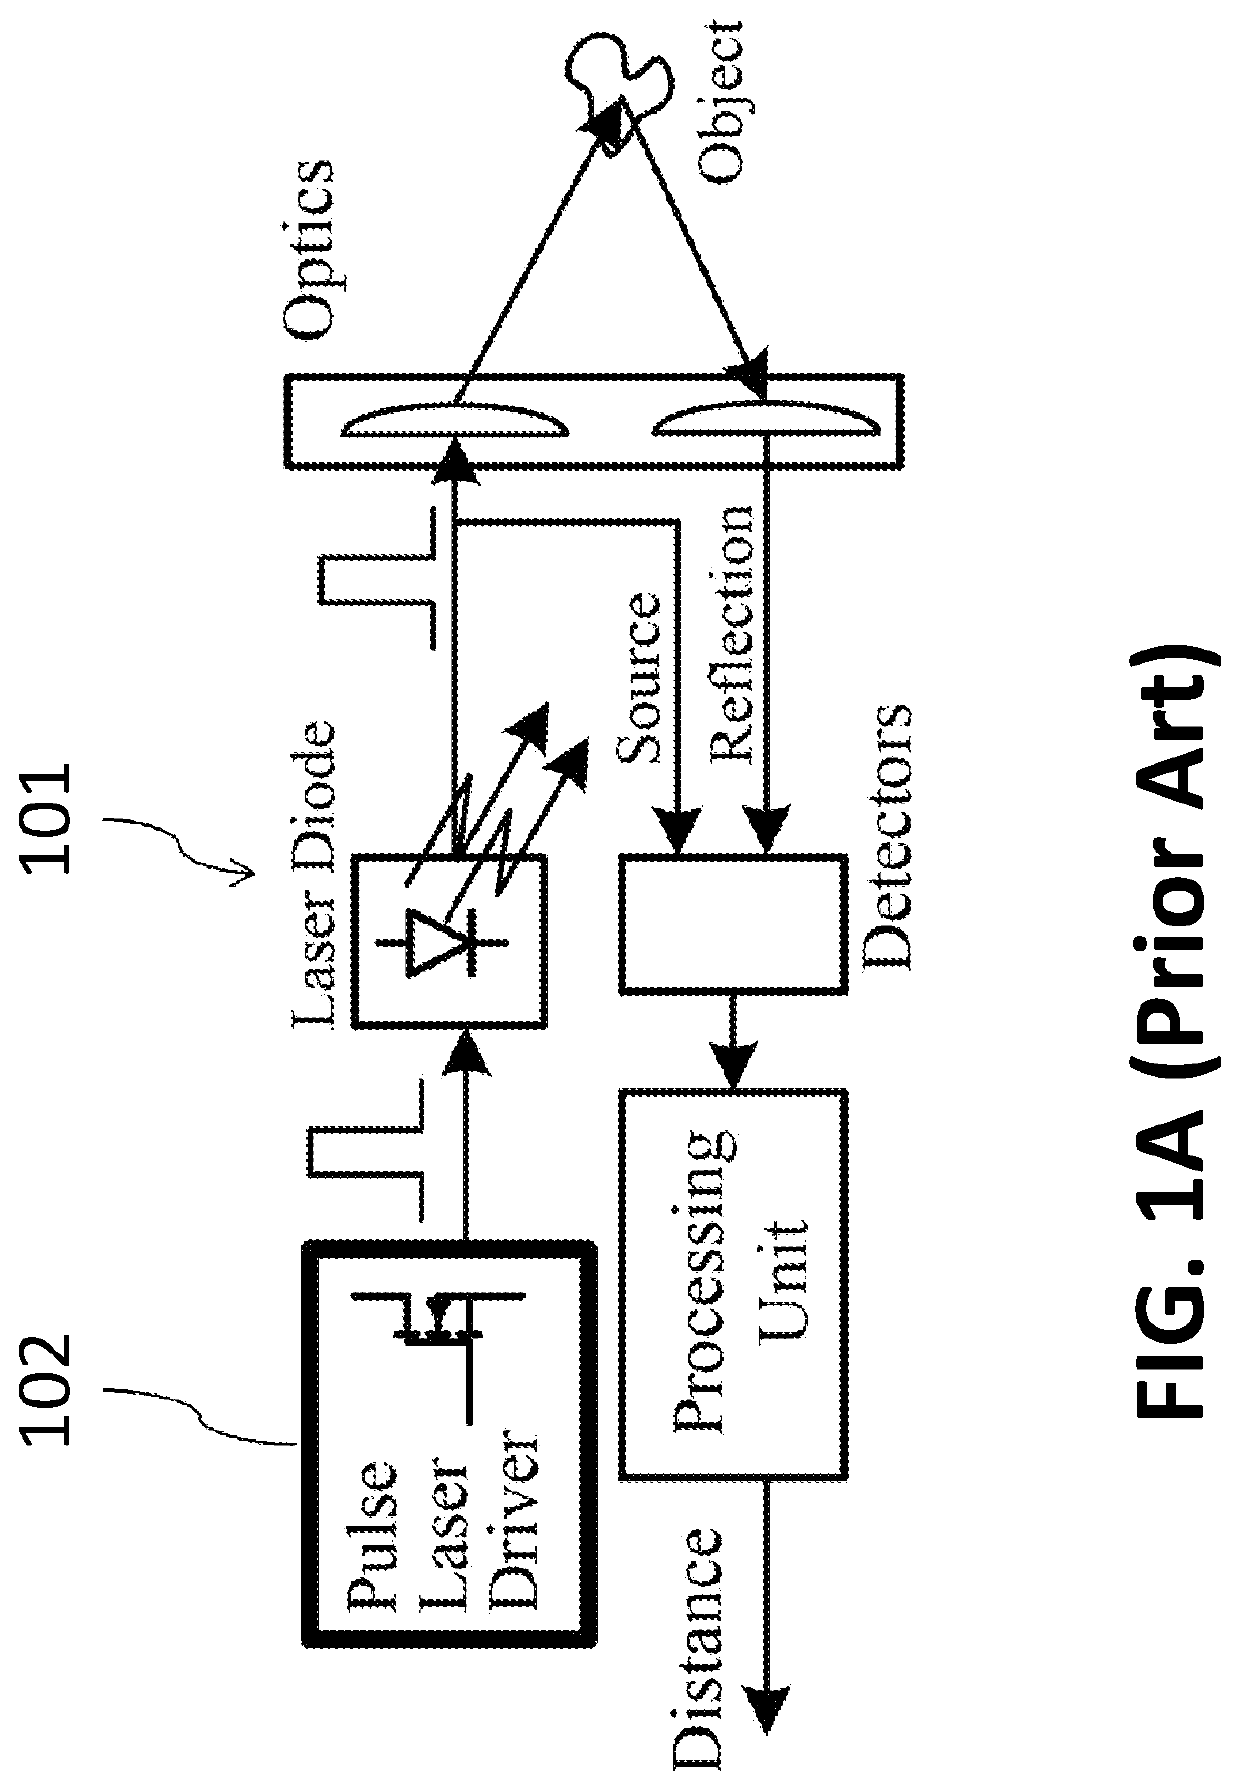 Low voltage sub-nanosecond pulsed current driver IC for high-resolution lidar applications